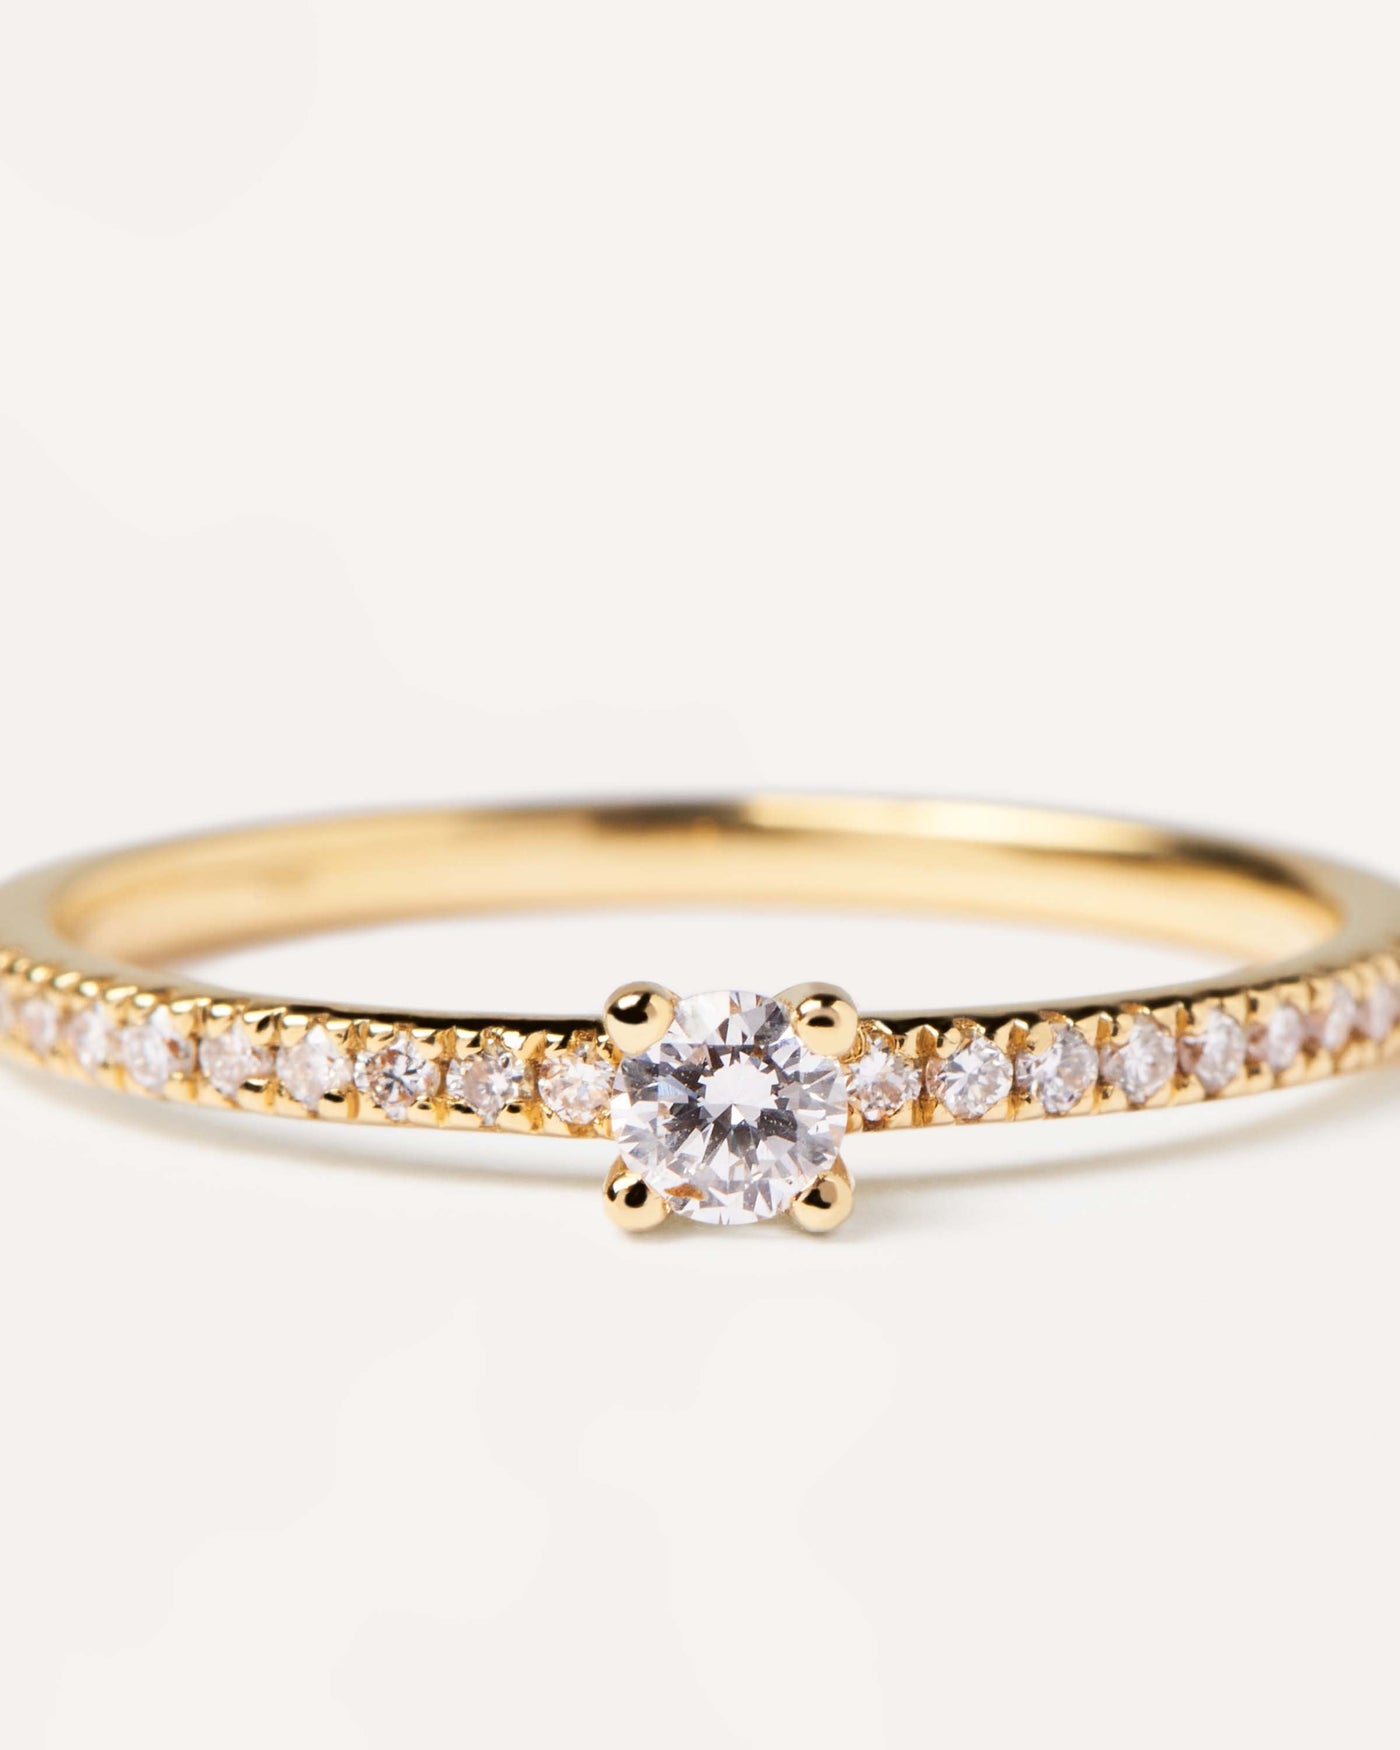 2023 Selection | Diamonds and gold Solstice Ring. Solid yellow gold ring with diamond eternity band and a round cut center diamond, making 0.31K. Get the latest arrival from PDPAOLA. Place your order safely and get this Best Seller. Free Shipping.